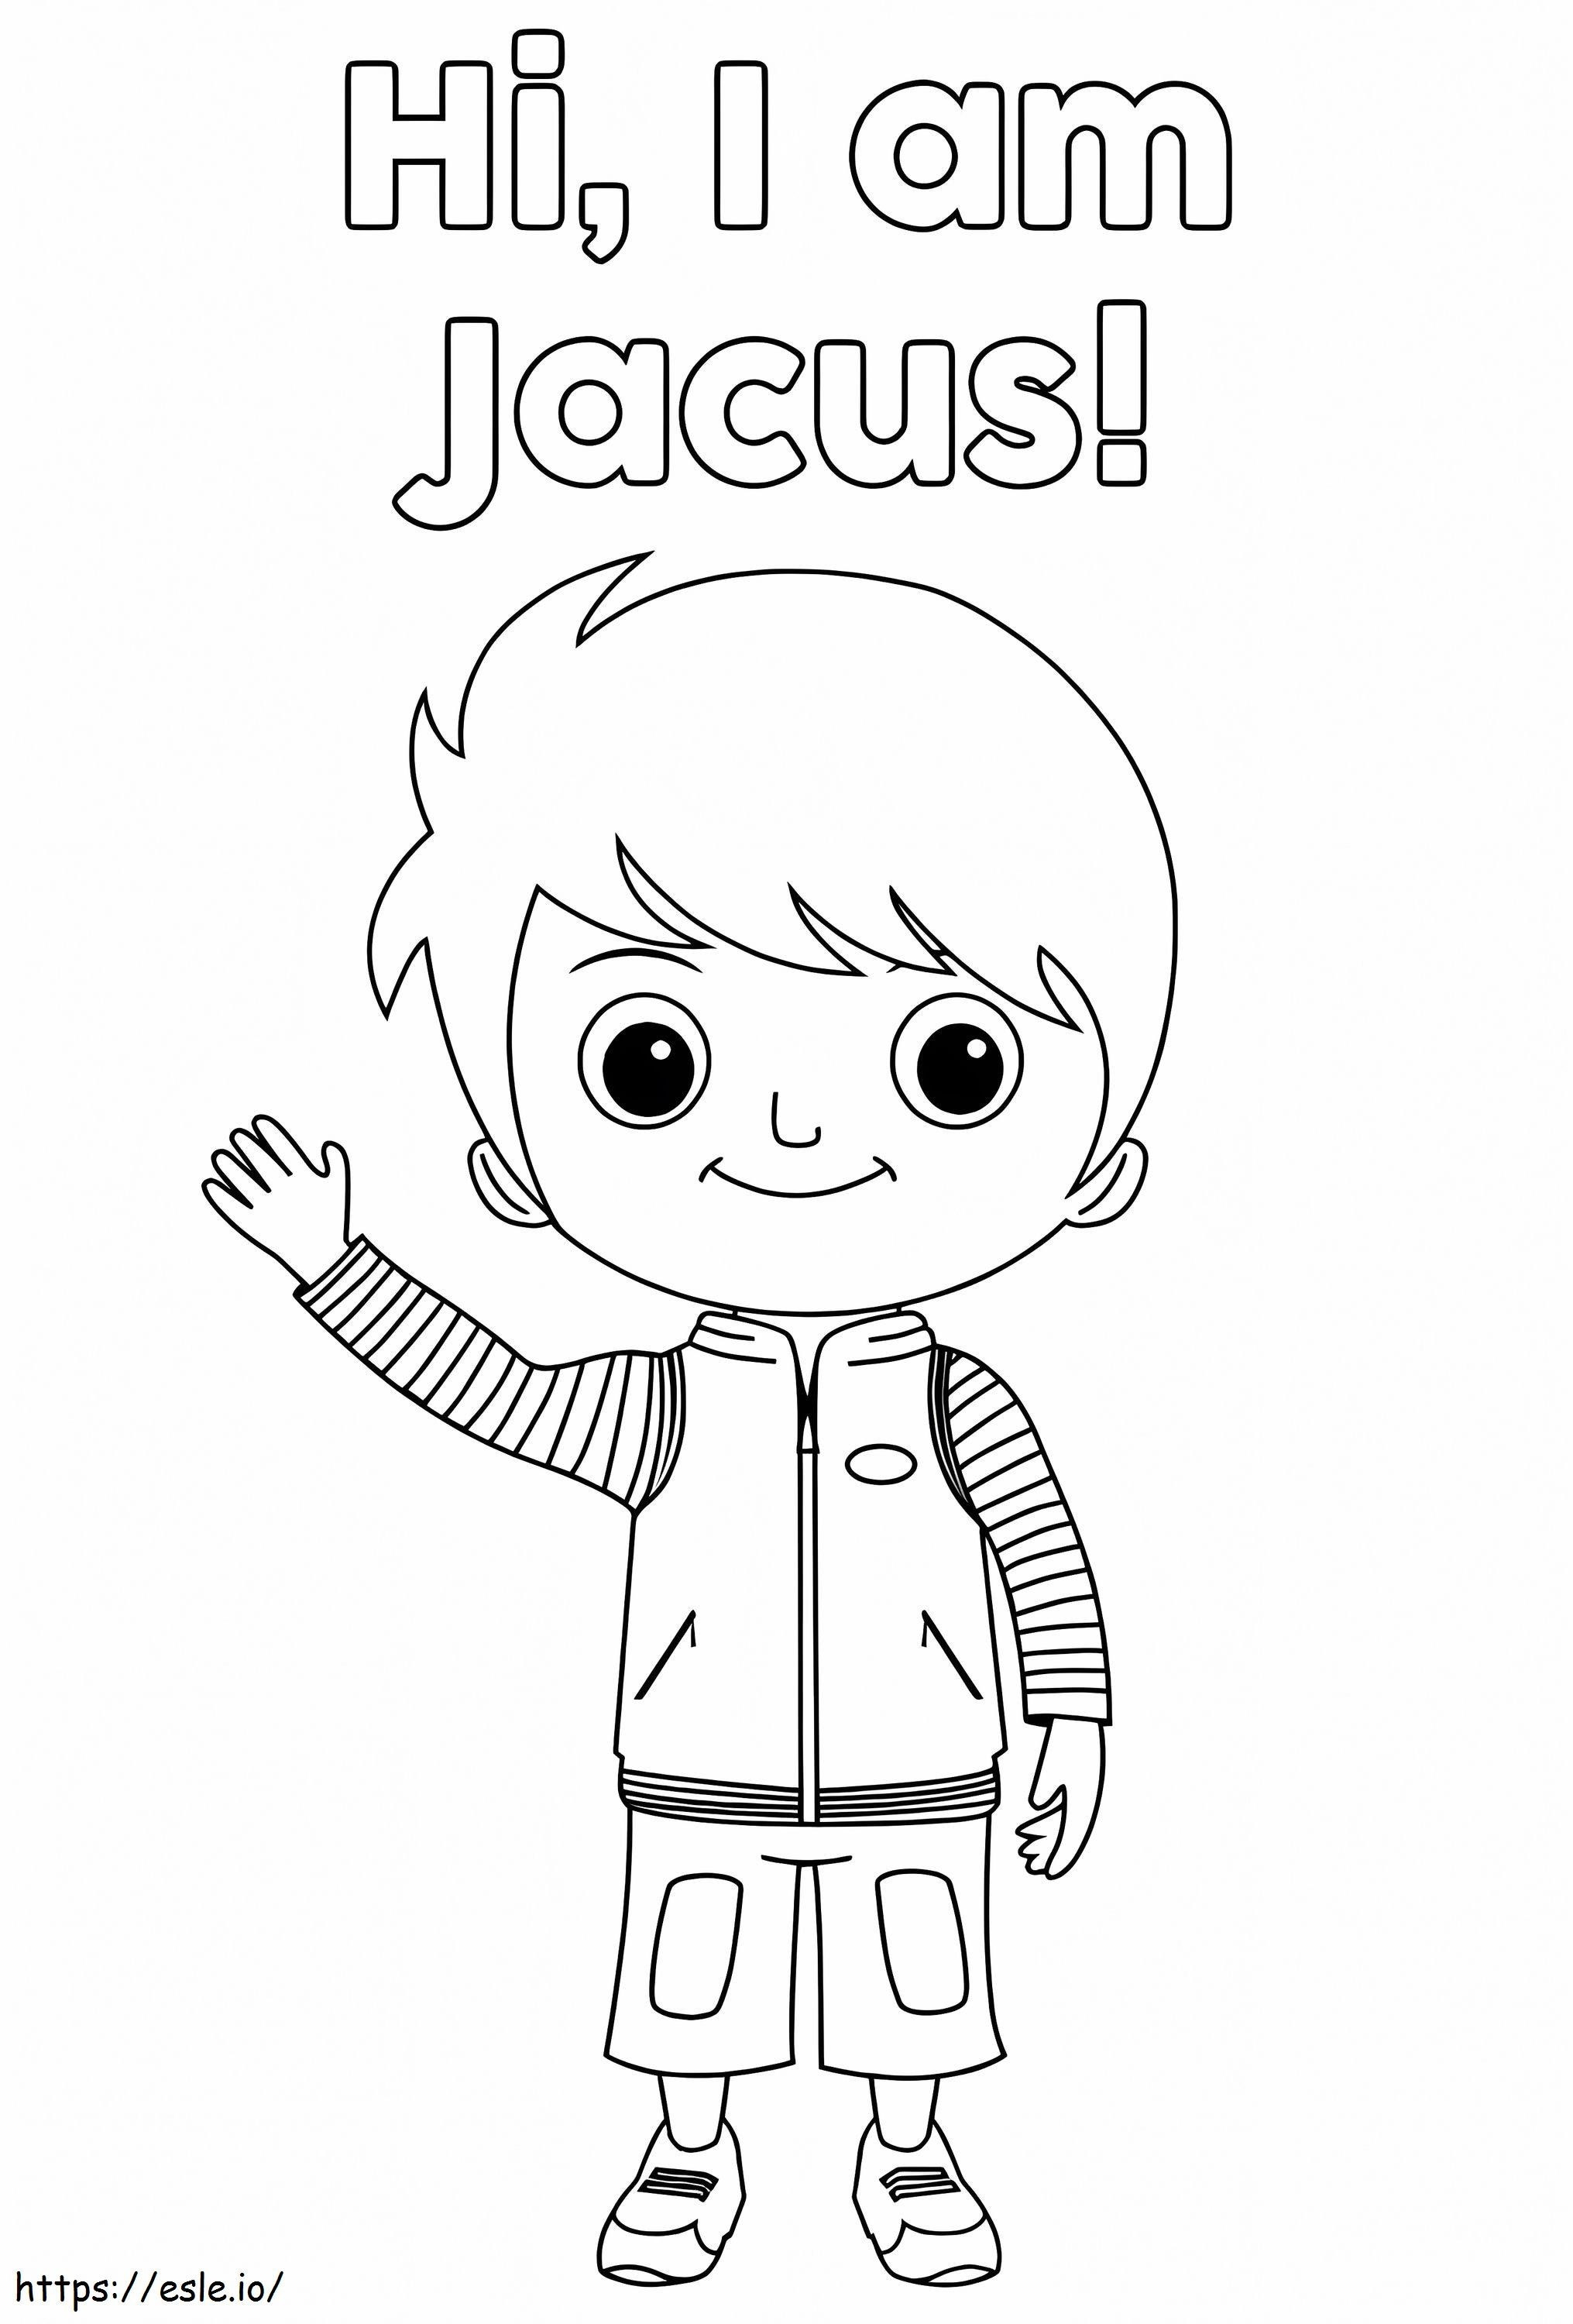 Jacus Little Baby Bum coloring page